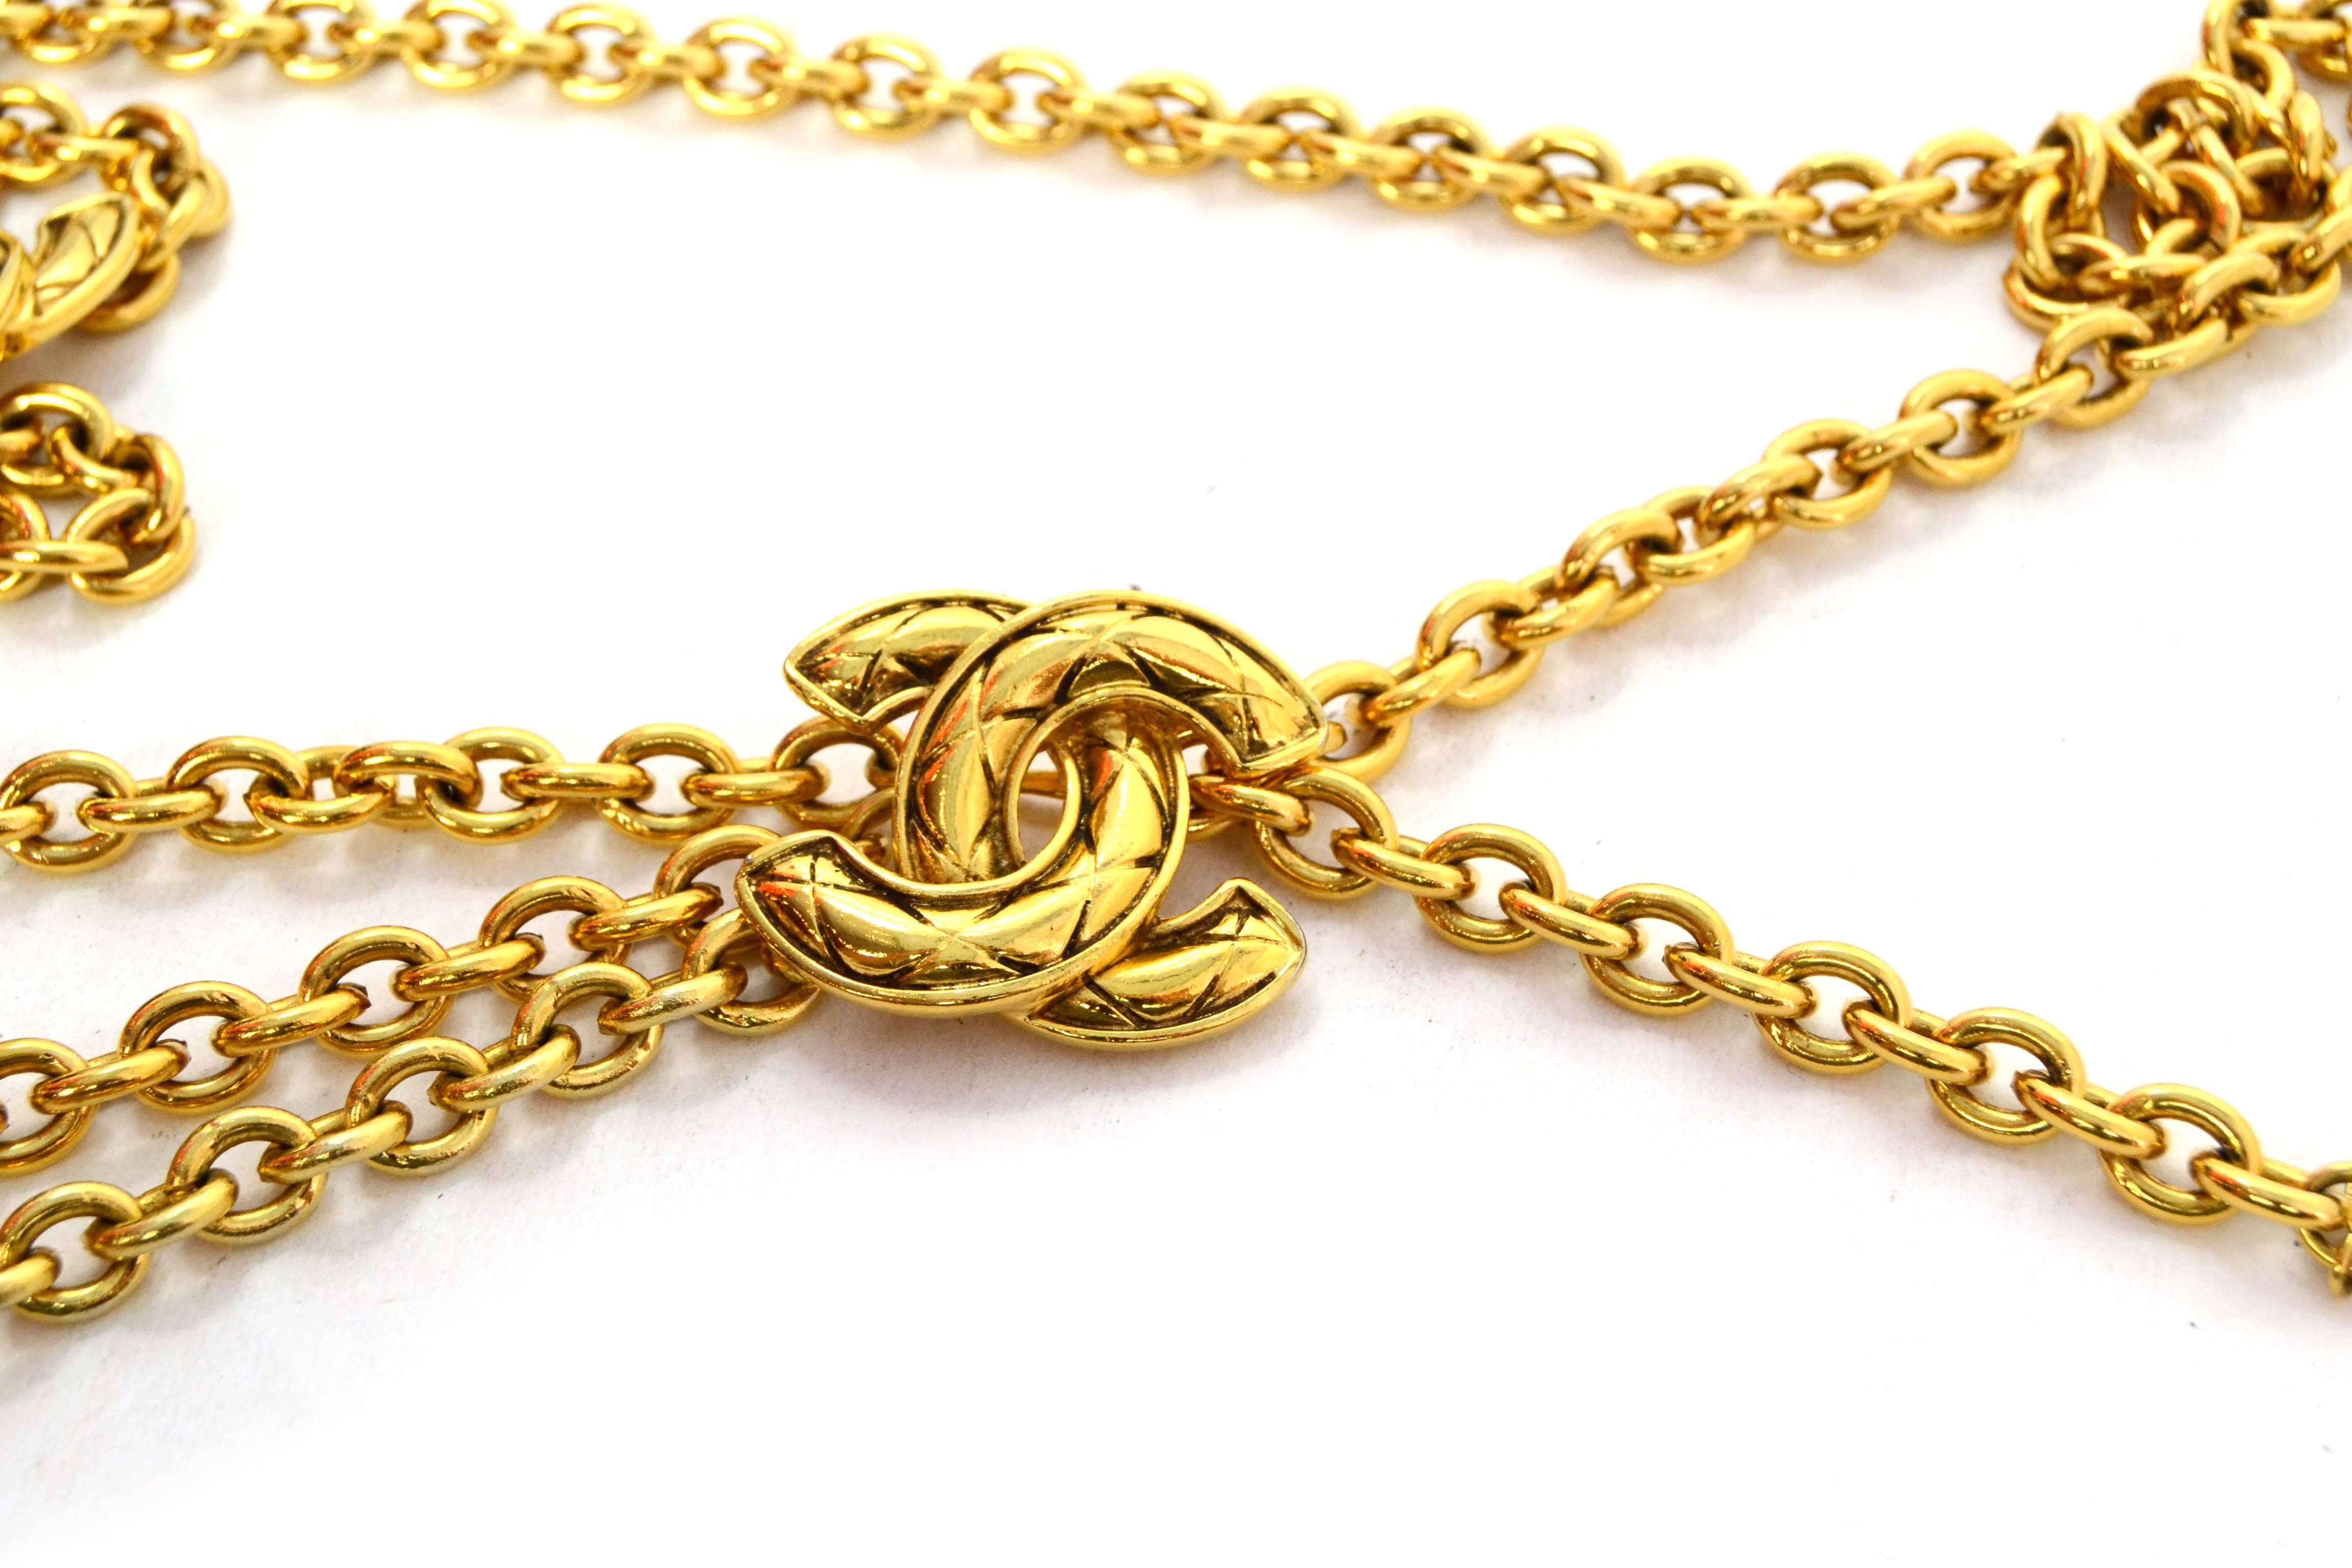 Chanel Vintage '90s Gold Chain Link Belt 
Features two large quilted CC's and small CC pendant at closure
Made In: France
Year of Production: 1990's
Color: Goldtone
Materials: Metal
Closure: Hook closure
Stamp: Chanel CC Made in